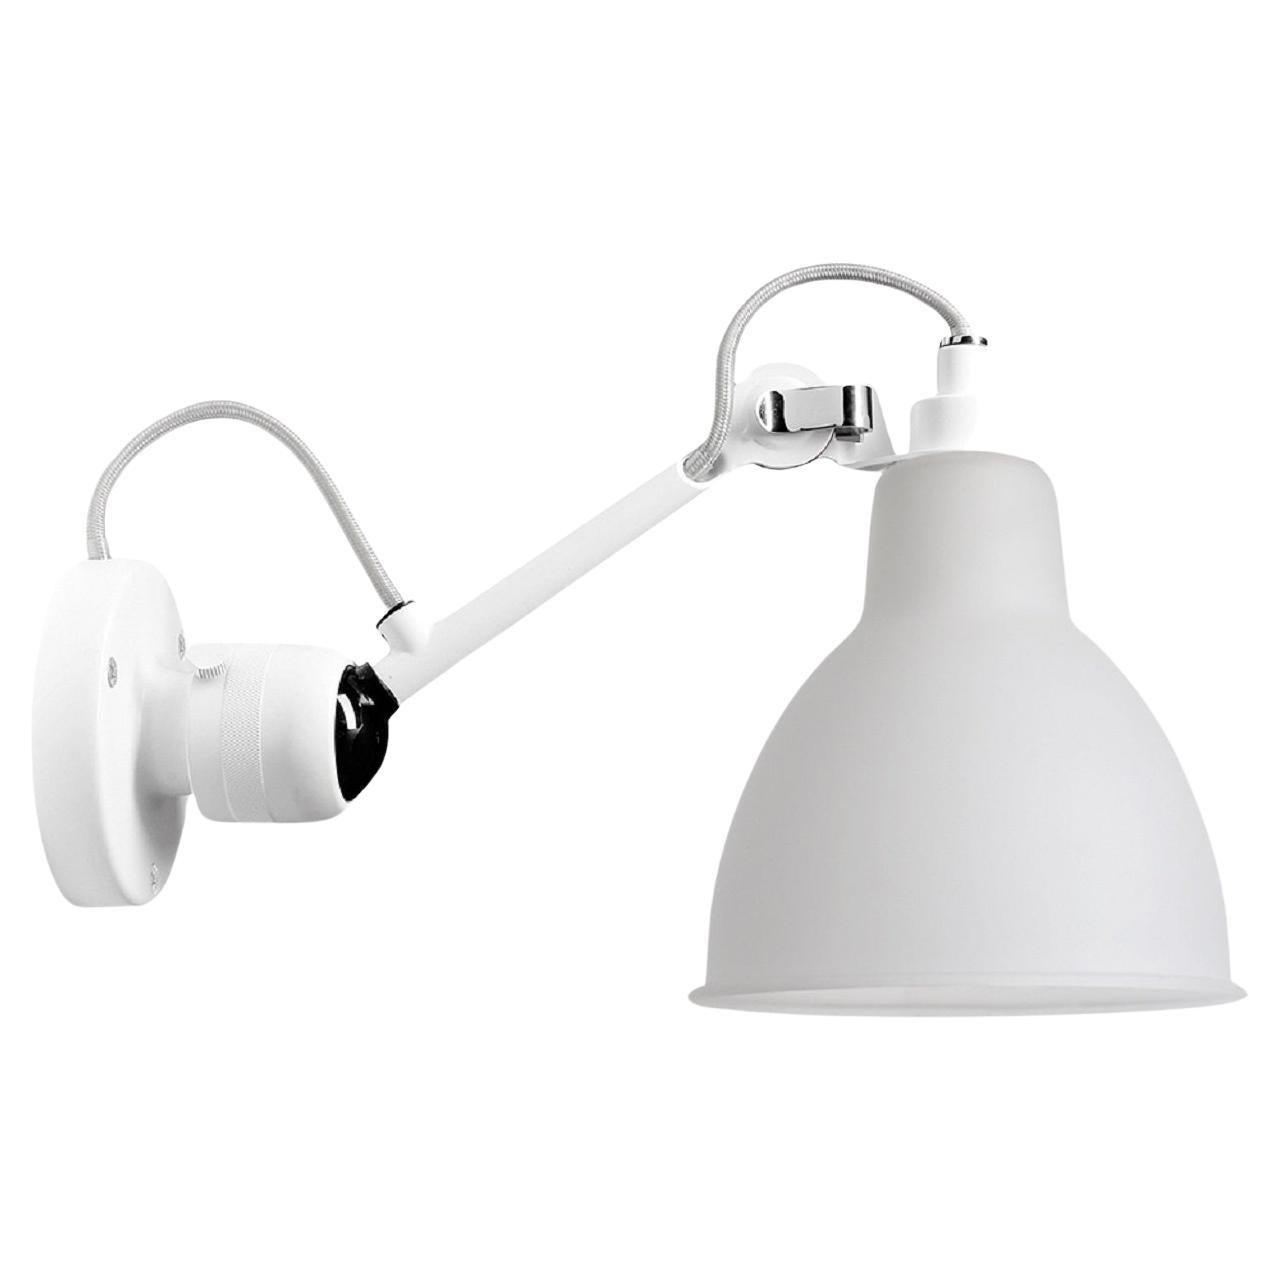 DCW Editions La Lampe Gras N°304 Wall Lamp in White Arm and Frosted Glass Shade For Sale